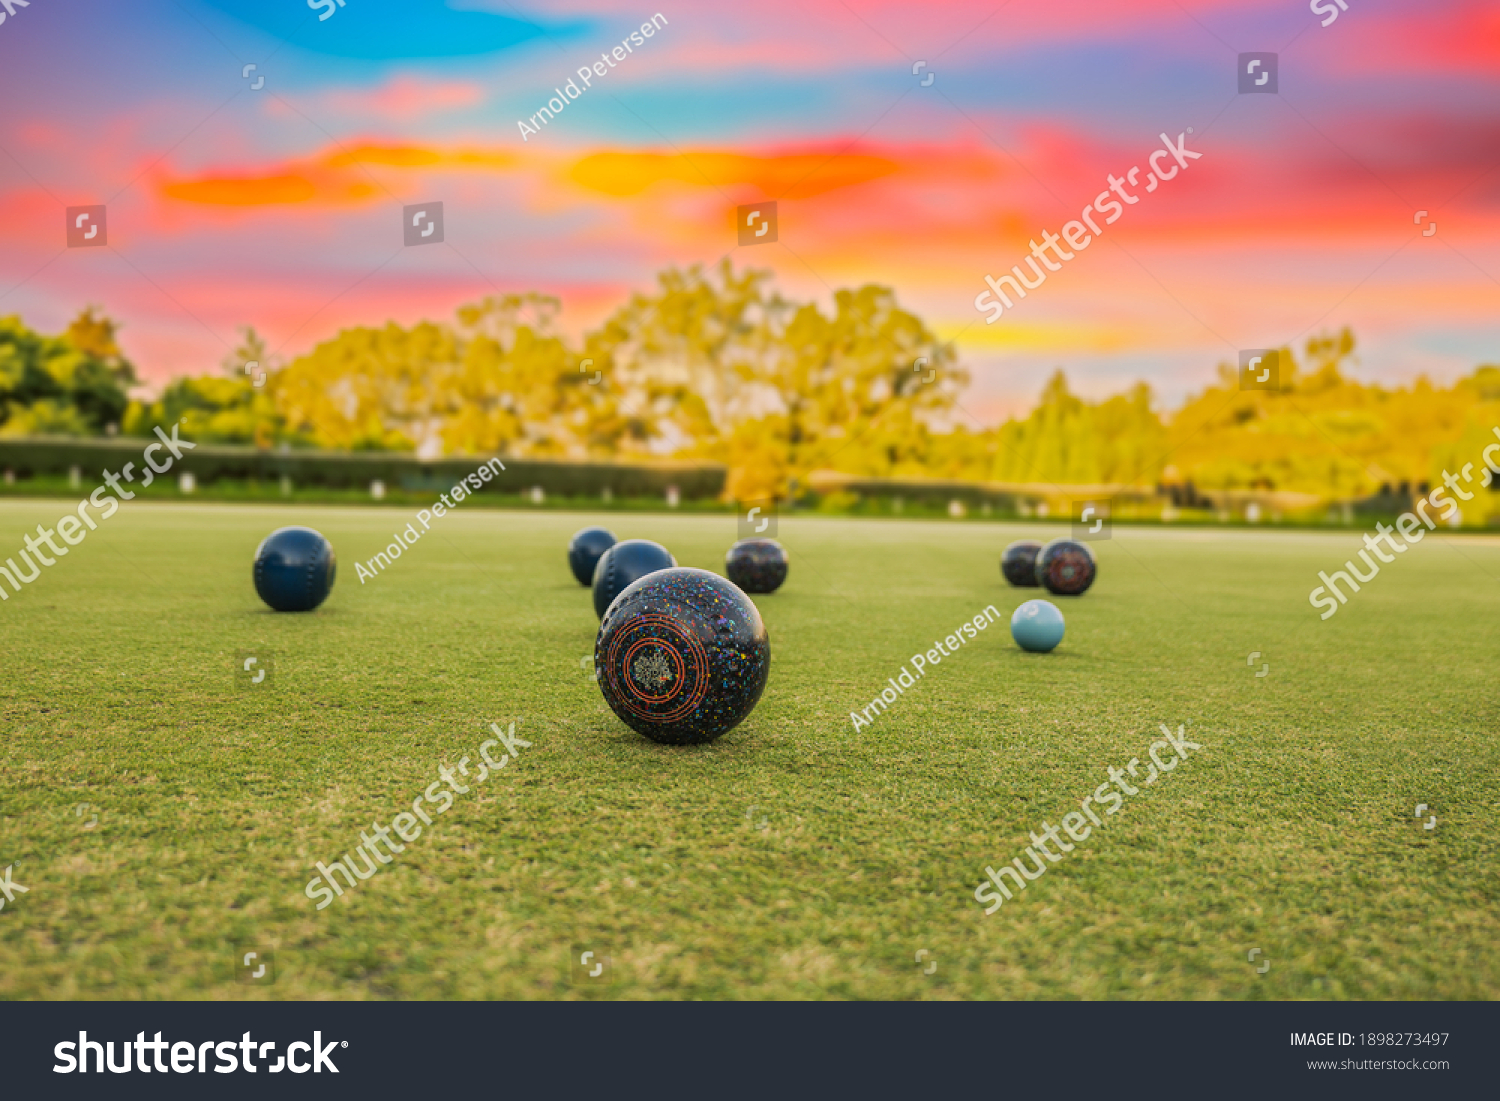 Lawn bowls balls in a field after the game with a colourful sunset #1898273497